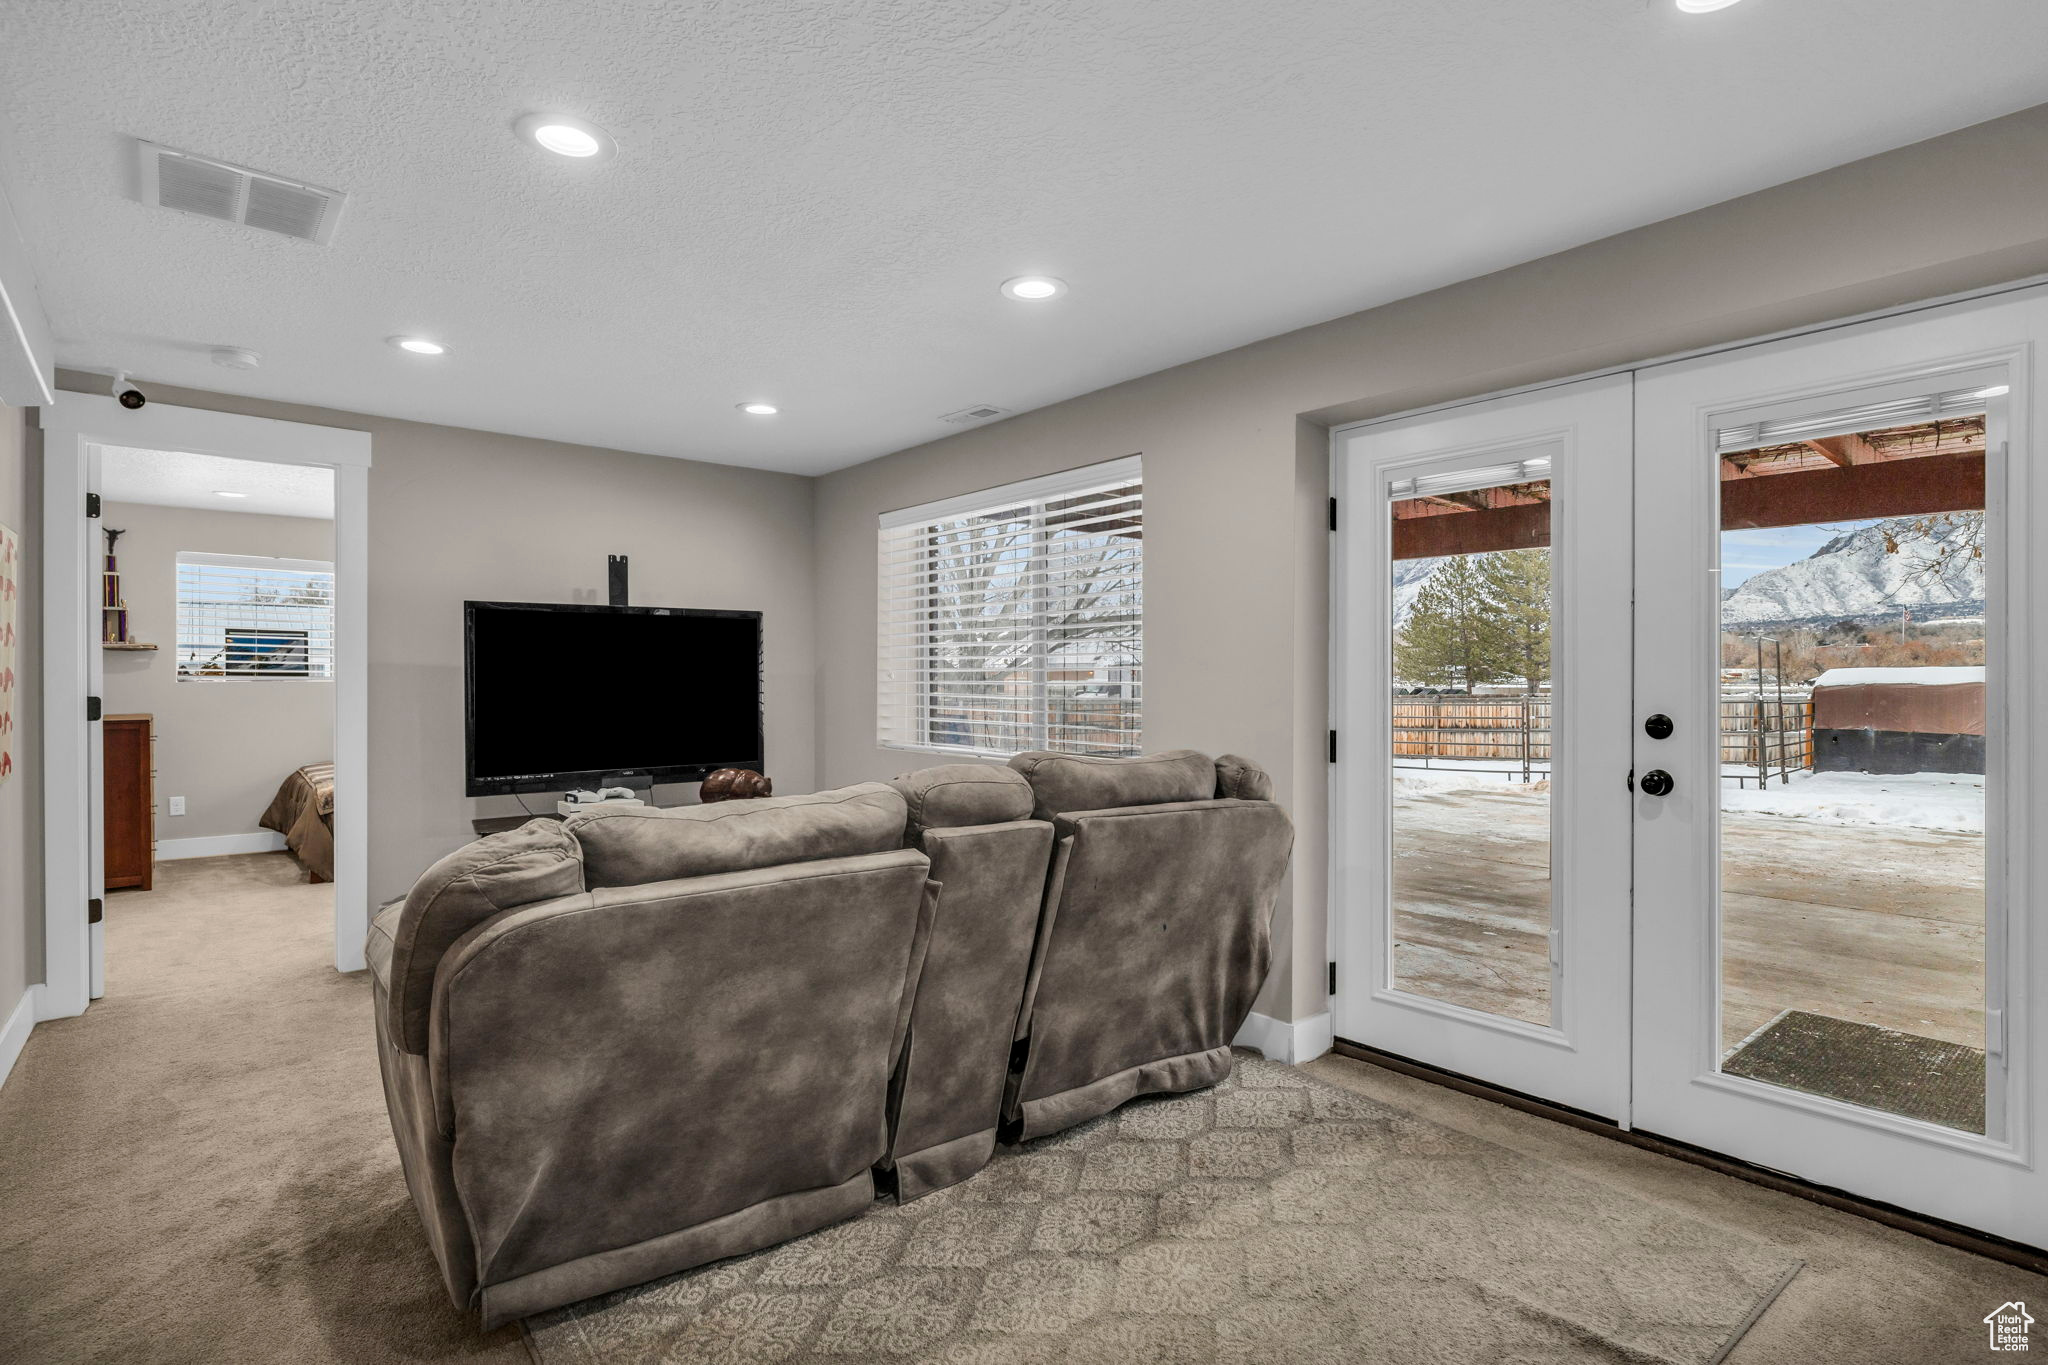 Ground level basement family room has covered patio access and natural light year round!